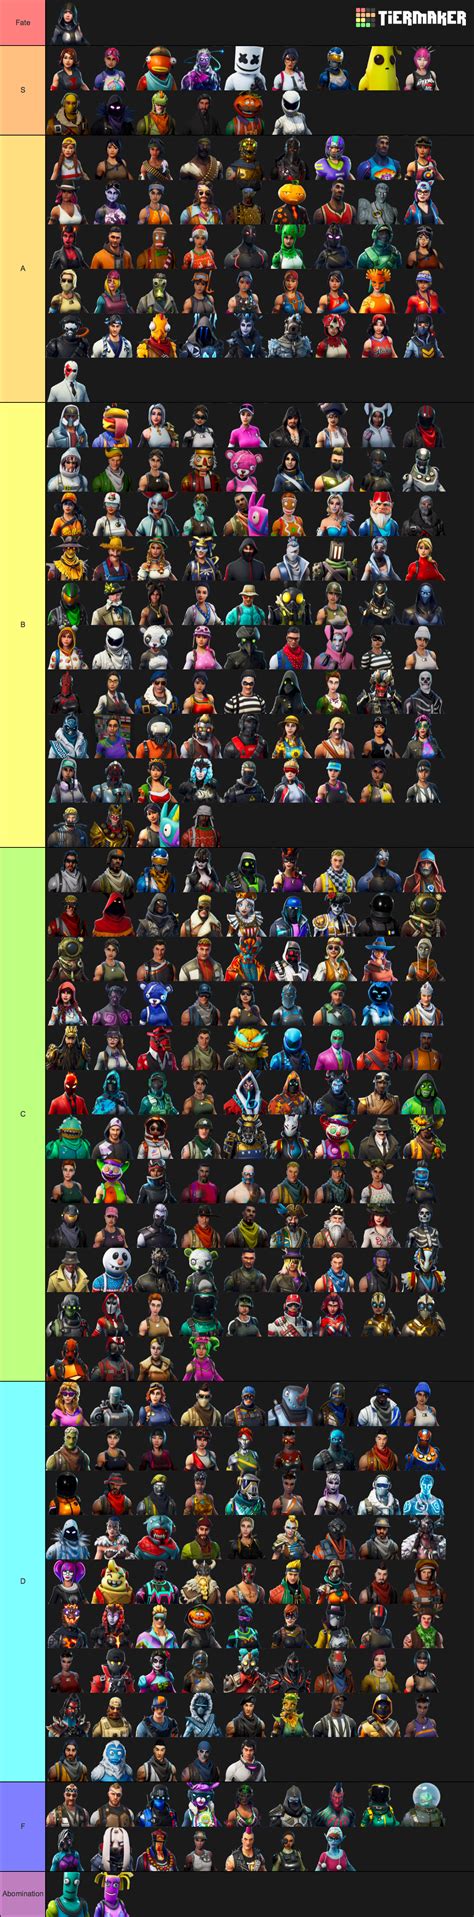 Create A Fortnite Every Skin Tier List Tiermaker Mobile Legends